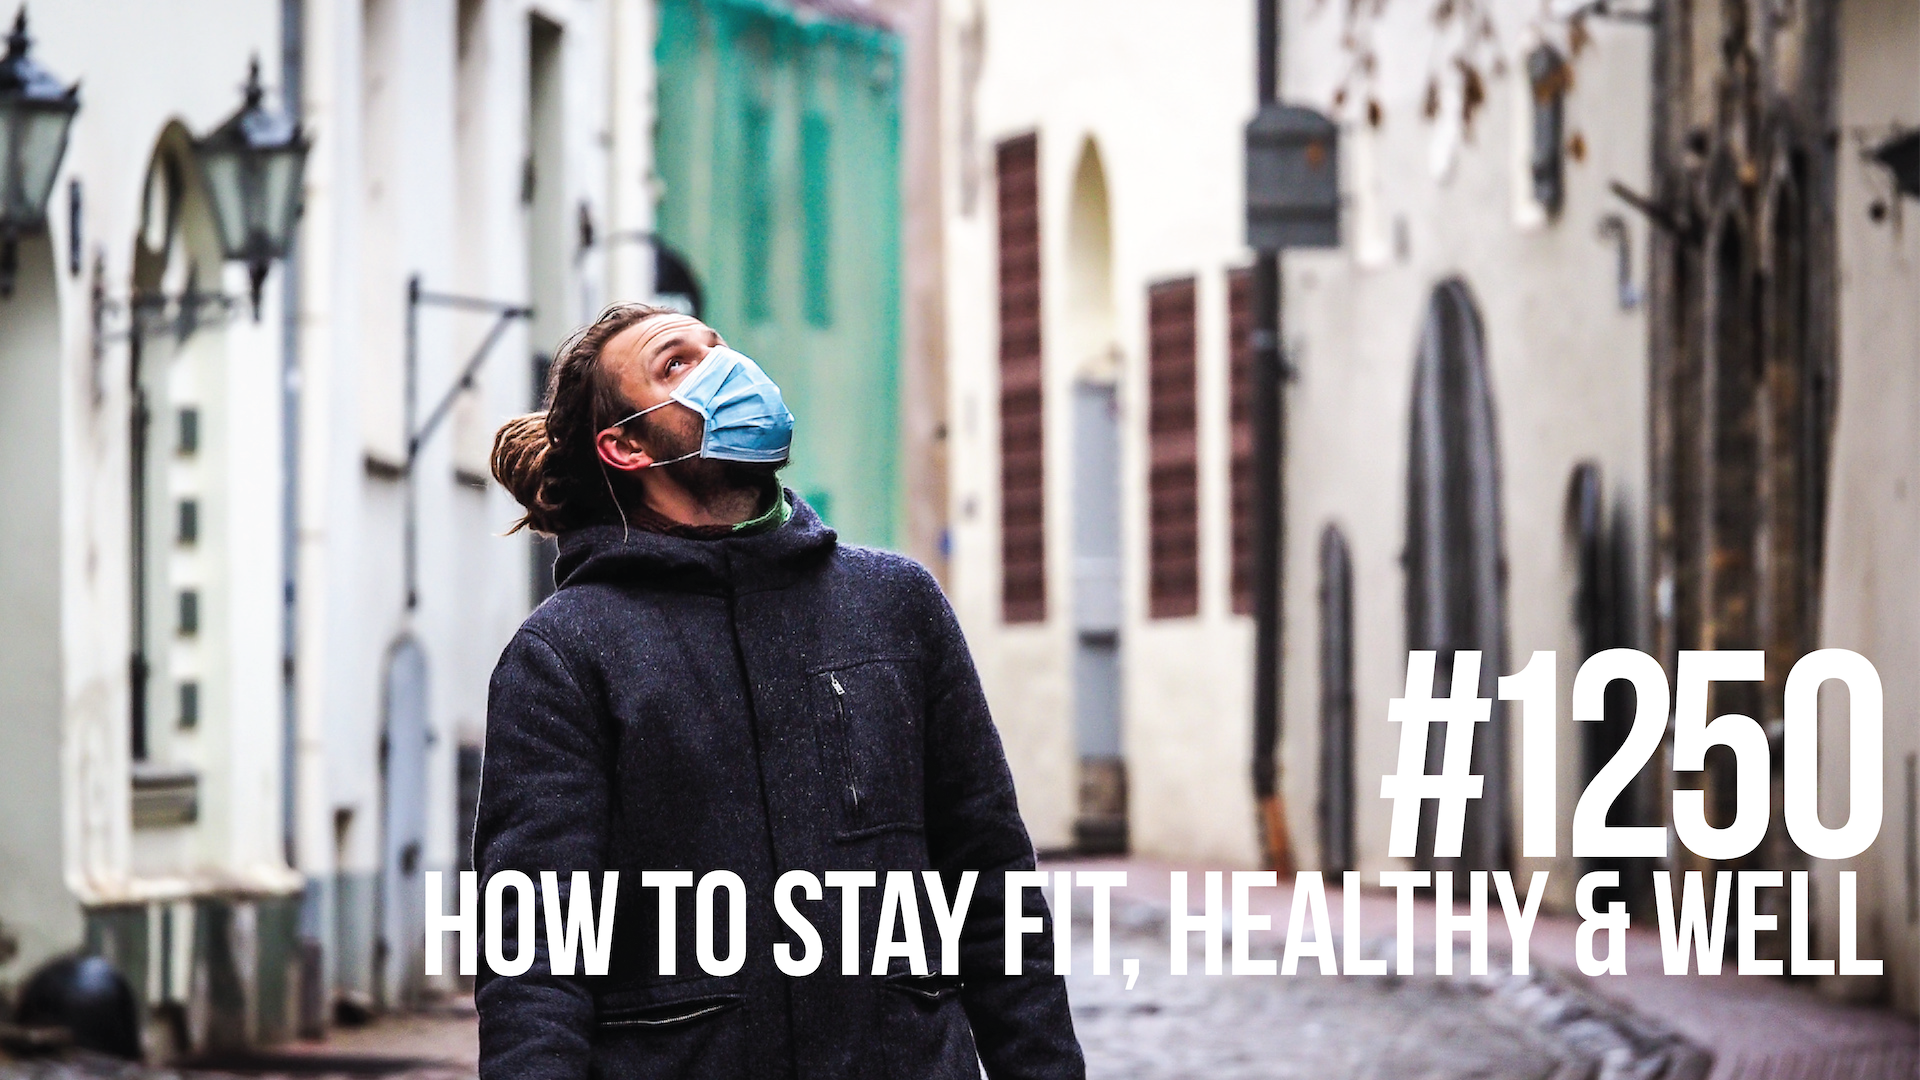 1250: How to Stay Fit, Healthy & Well During the Coronavirus Pandemic